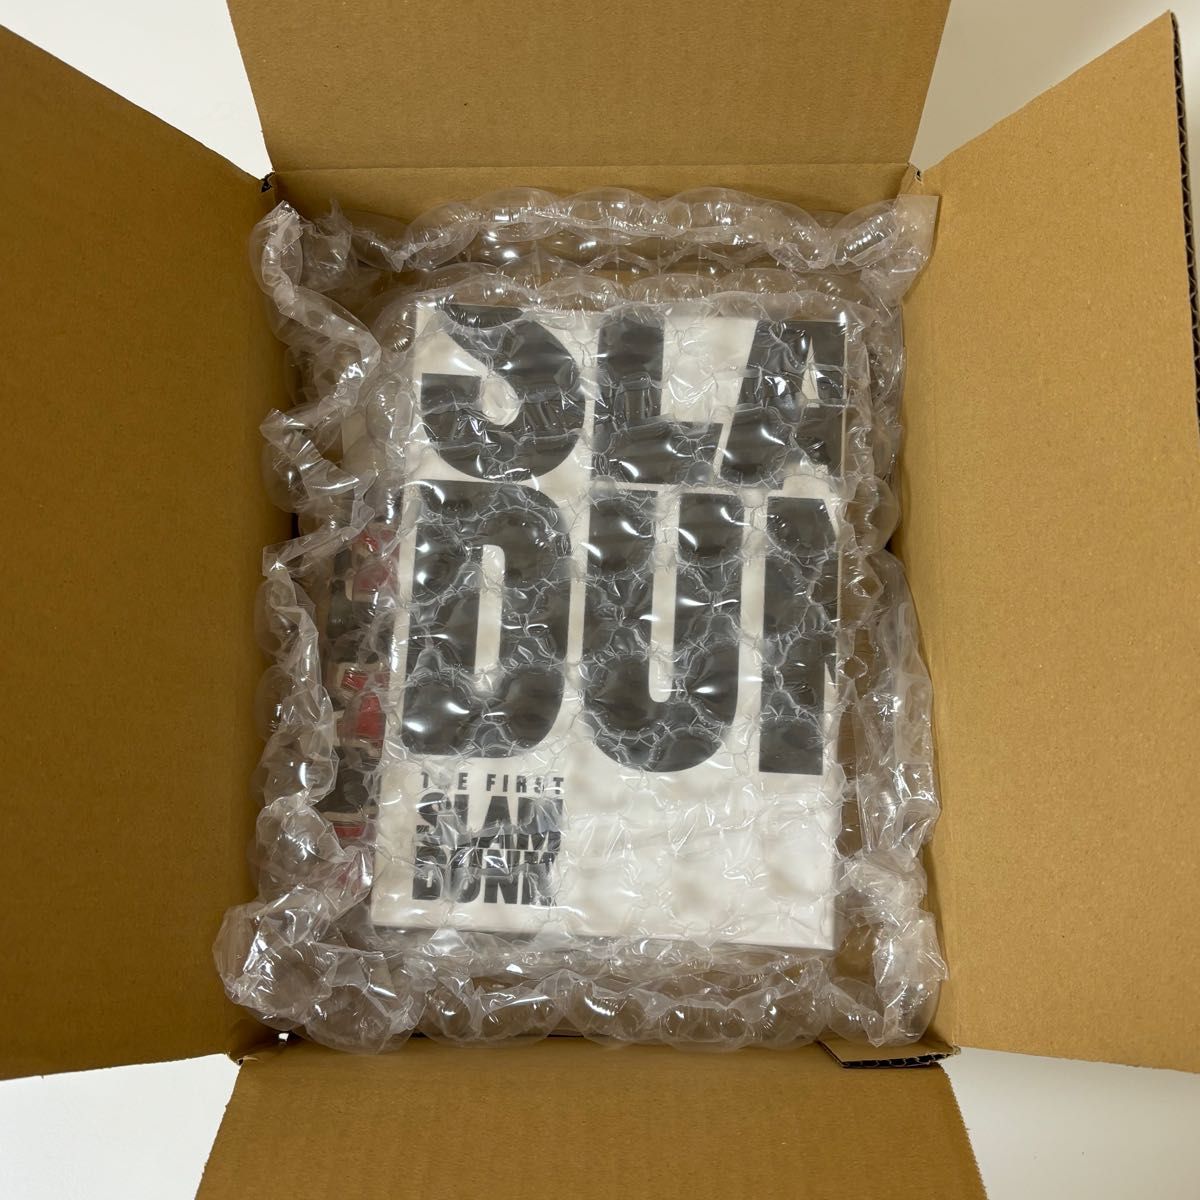 【Blu-ray 4K UHD】「THE FIRST SLAM DUNK」LIMITED EDITION＜初回生産限定＞